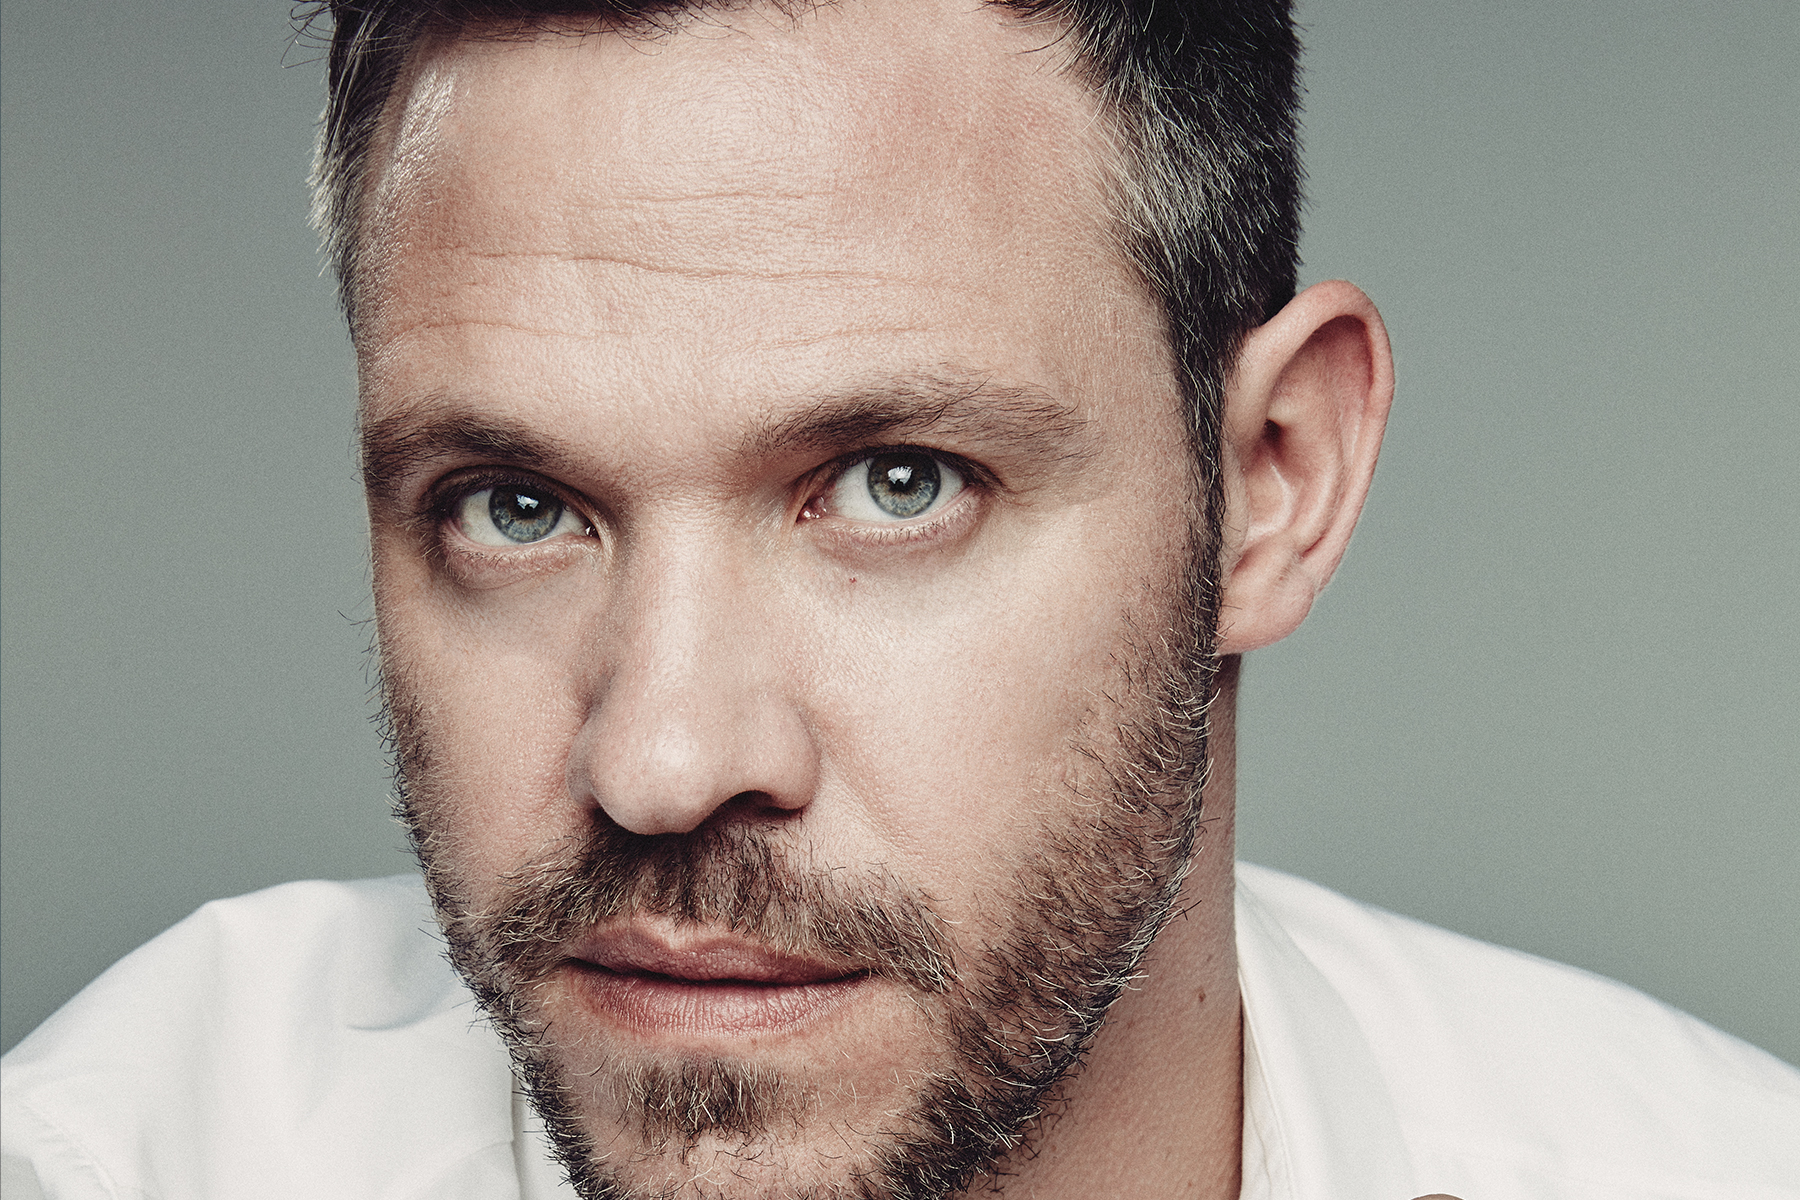 /content/dam/prh/articles/adults/2021/april/WillYoung_1800x1200.jpg